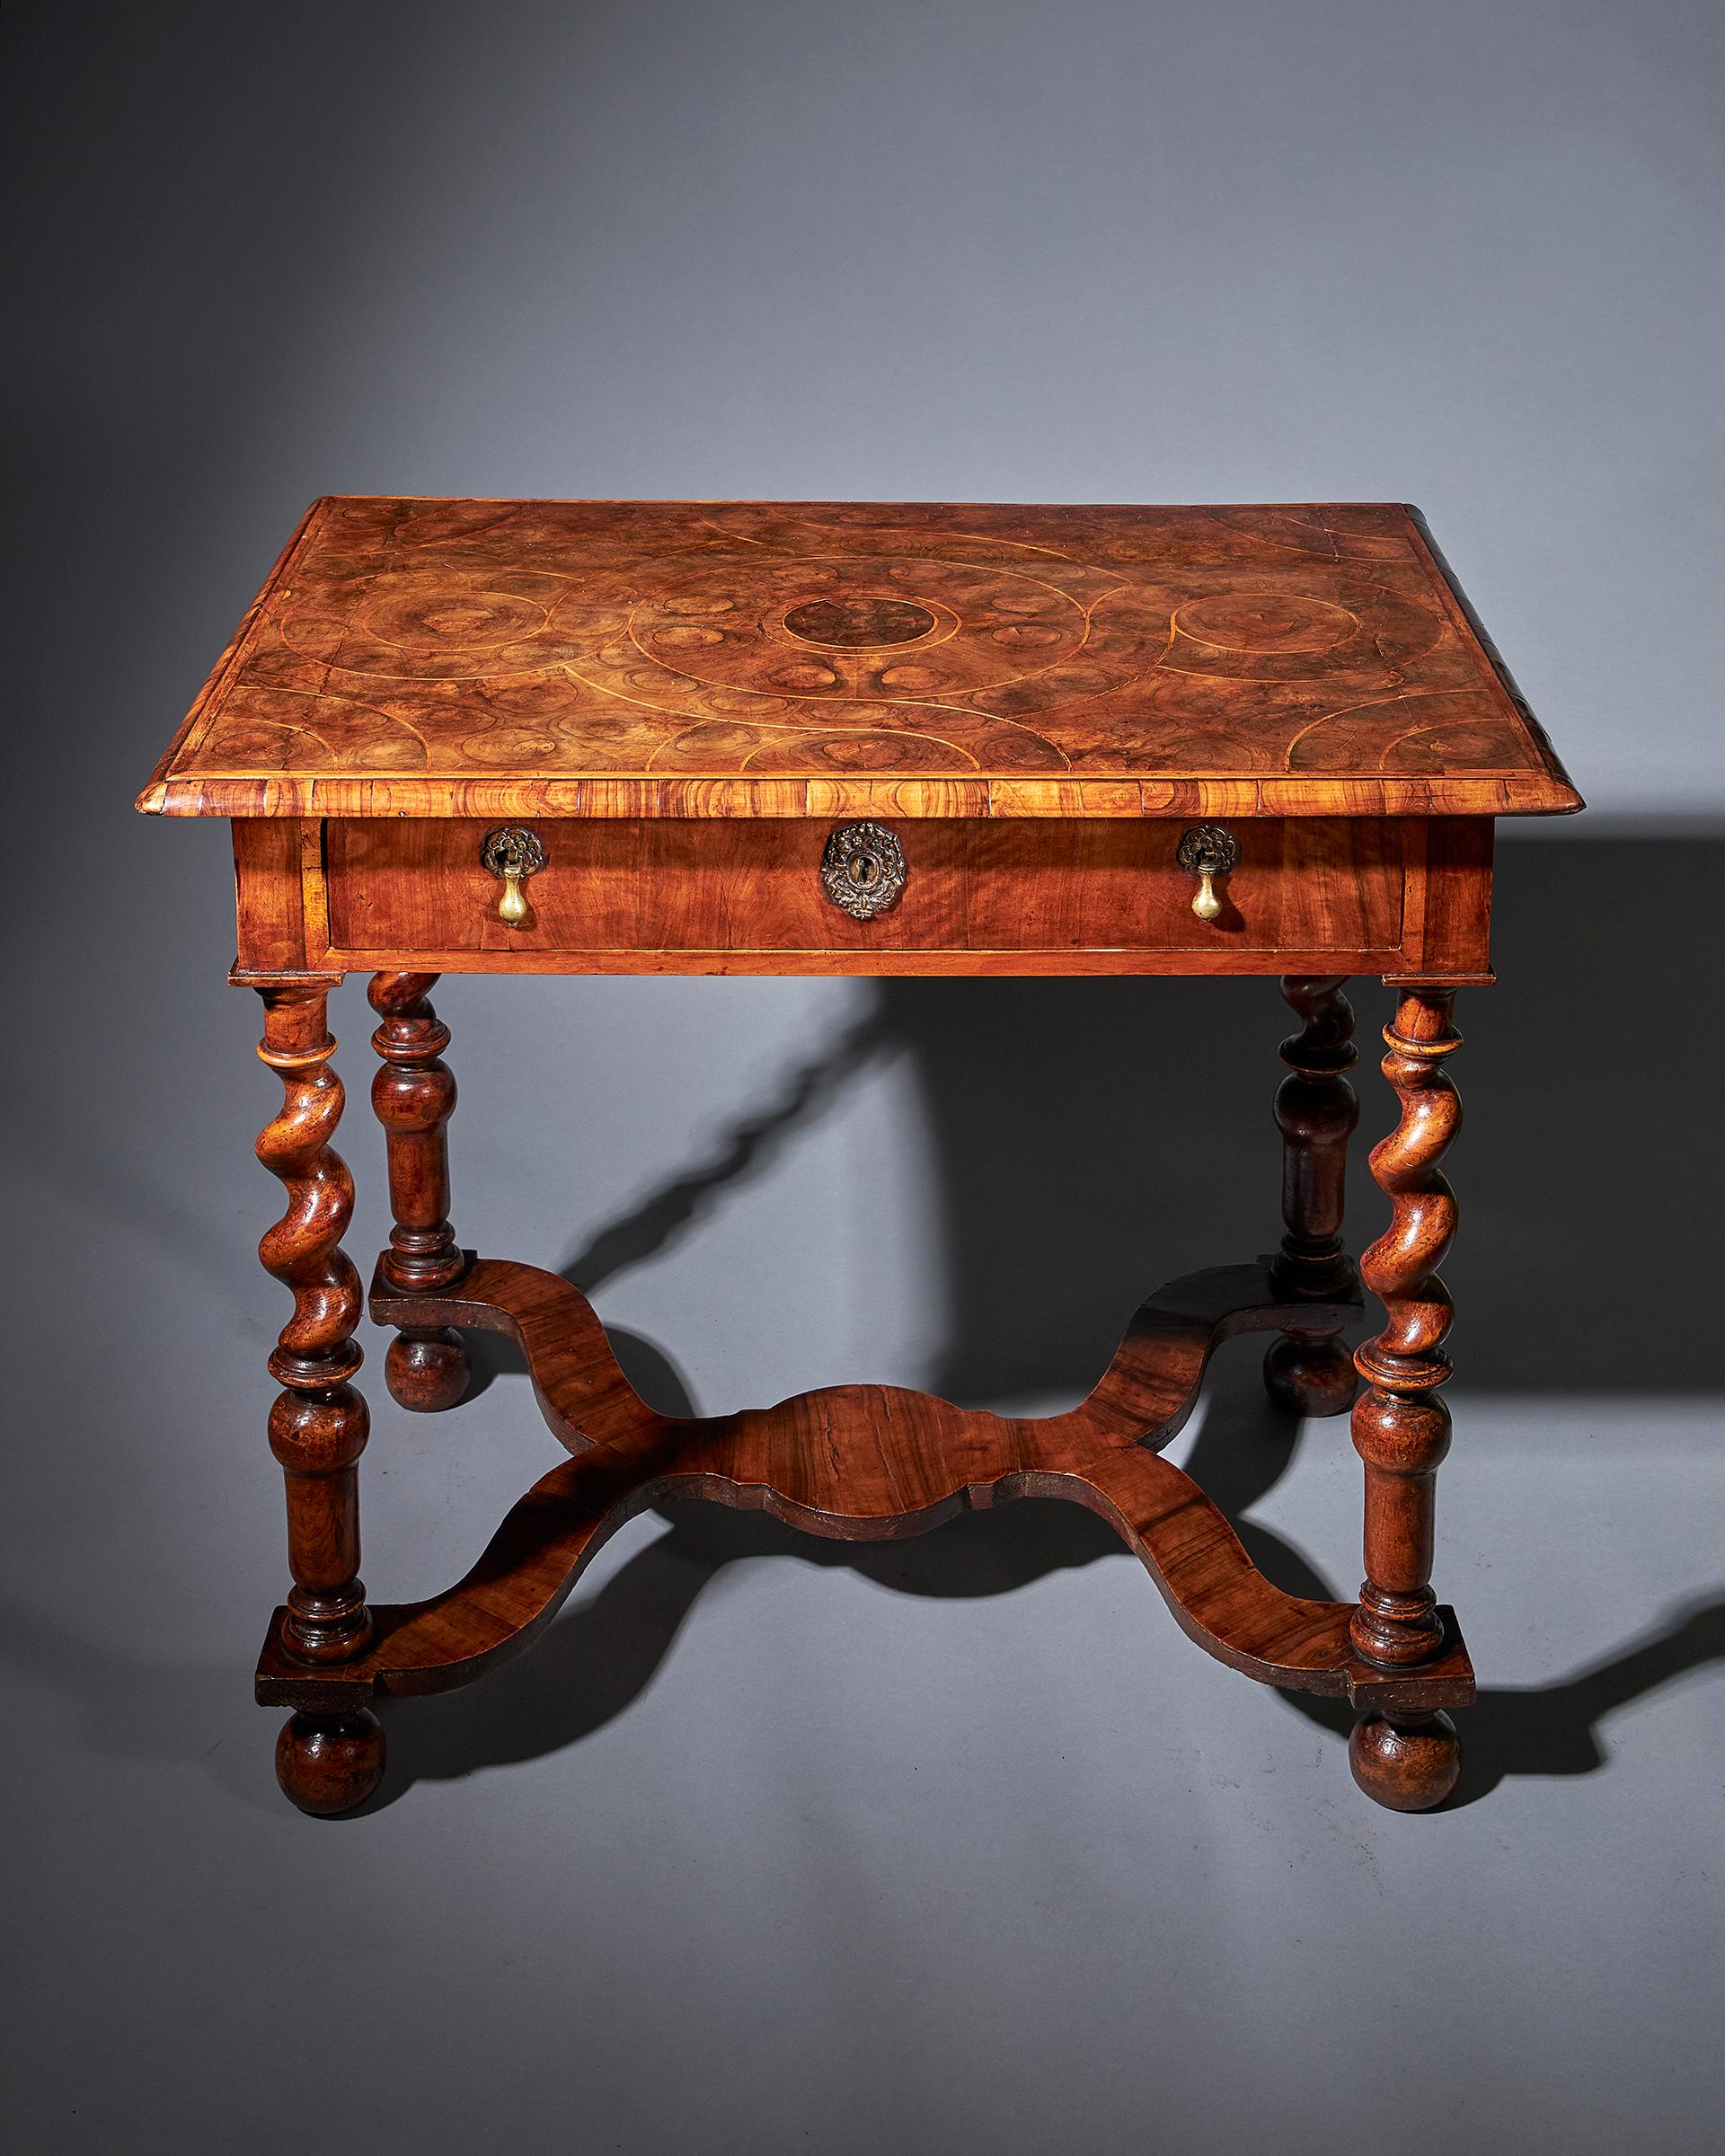 Exceptional and extremely rare 31” olive oyster table, circa 1670-1690. The original freely carved Solomonic or twist legs terminate on a reversed pear, joined by ‘y’ shaped stretcher veneered in cross grain olive, raised on all four original bun